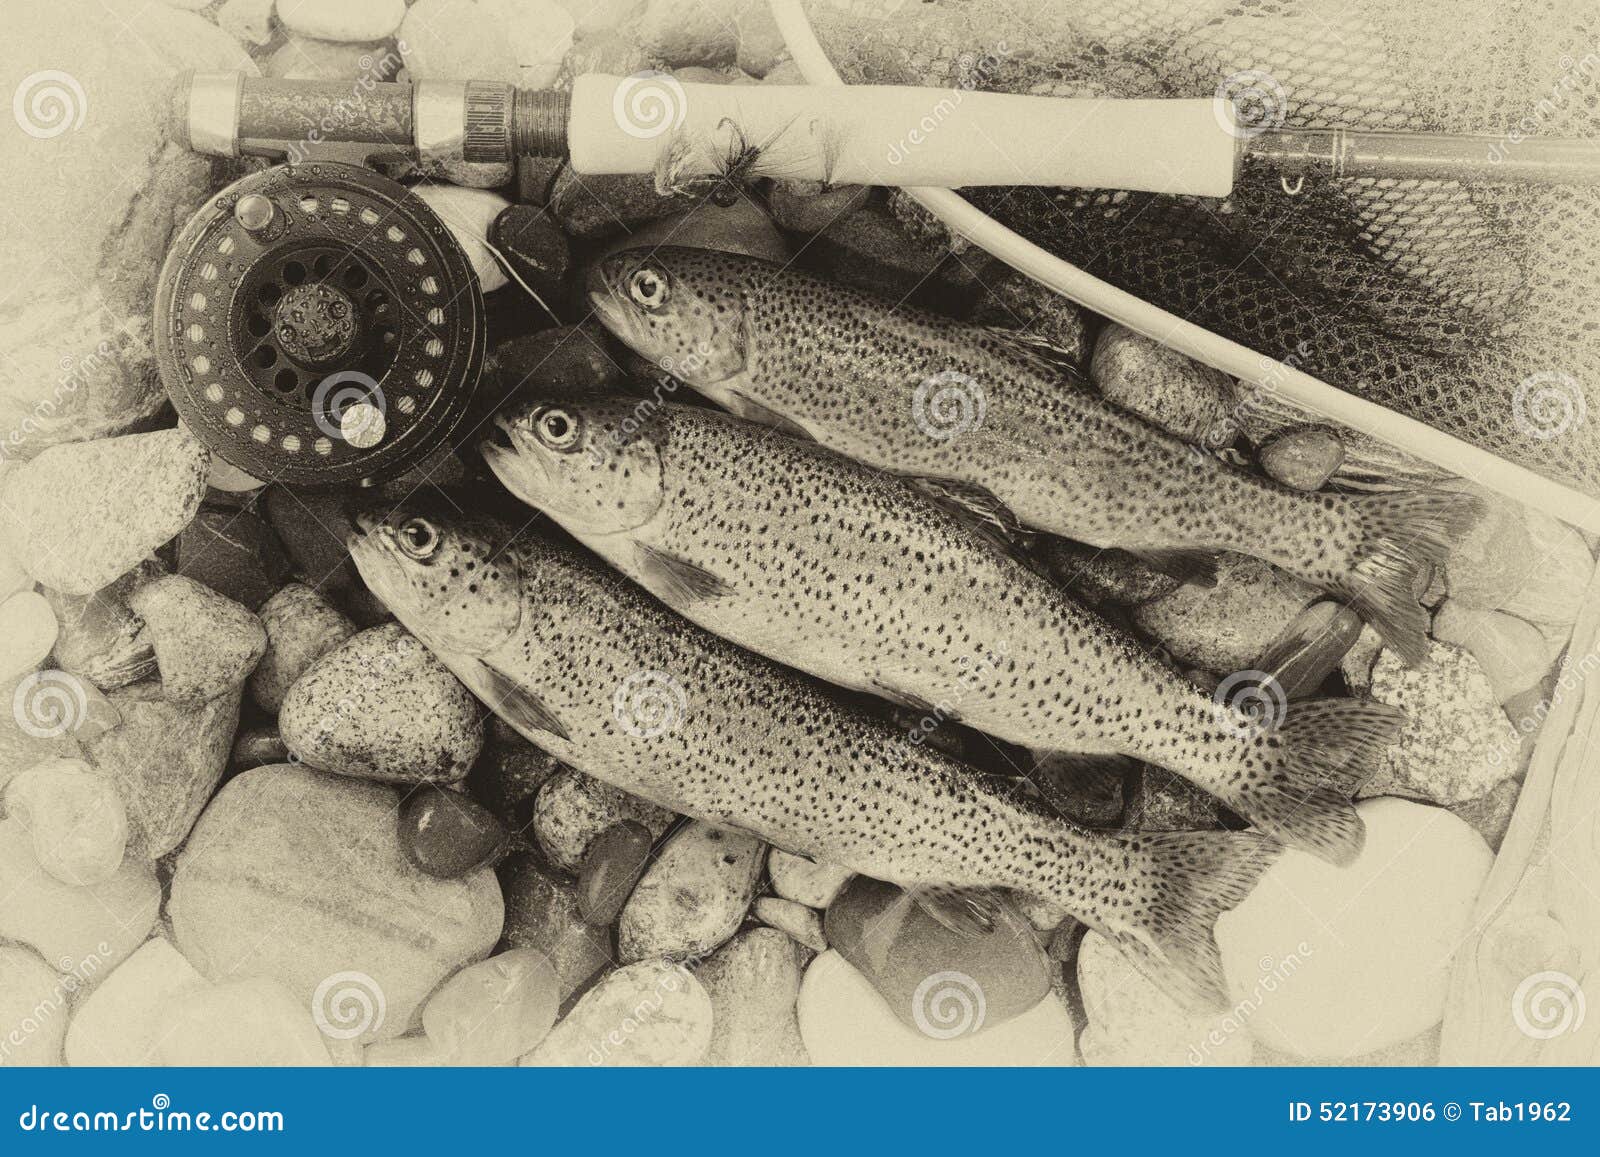 https://thumbs.dreamstime.com/z/traditional-vintage-trout-fishing-three-wild-fly-reel-landing-net-assorted-flies-wet-river-bed-stones-concept-52173906.jpg